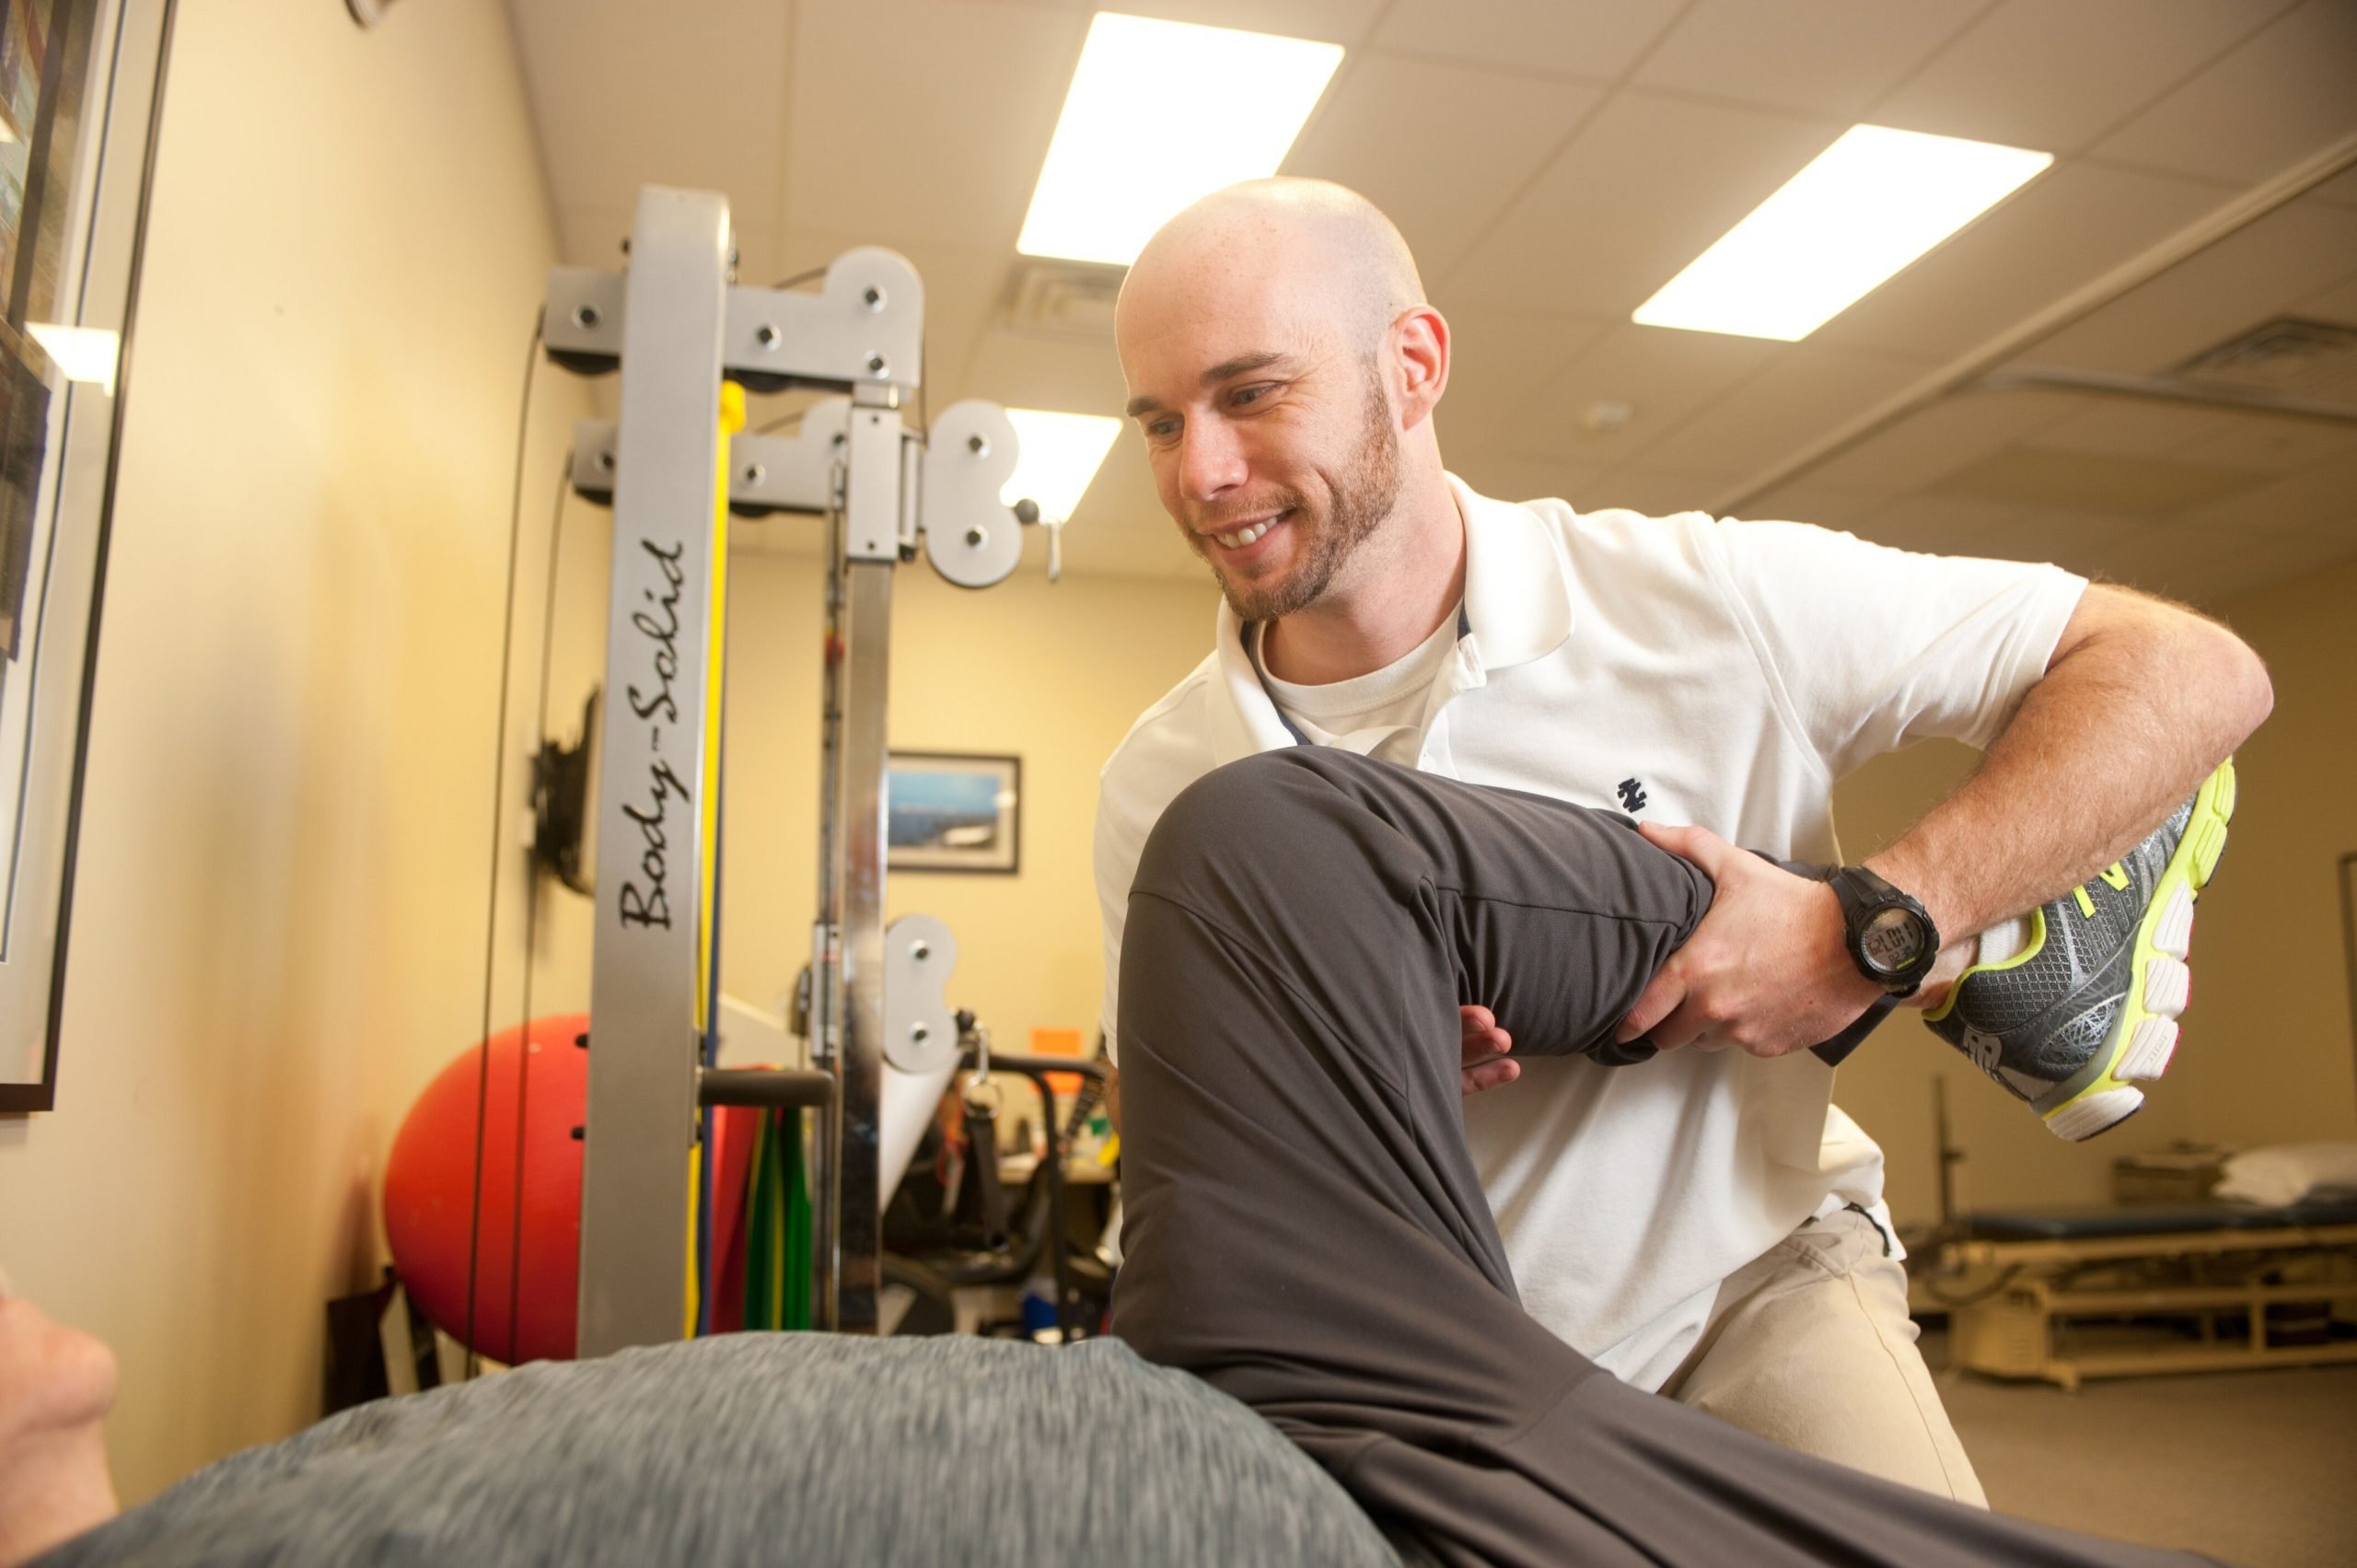 physical therapist Brian assisting with a patient's leg